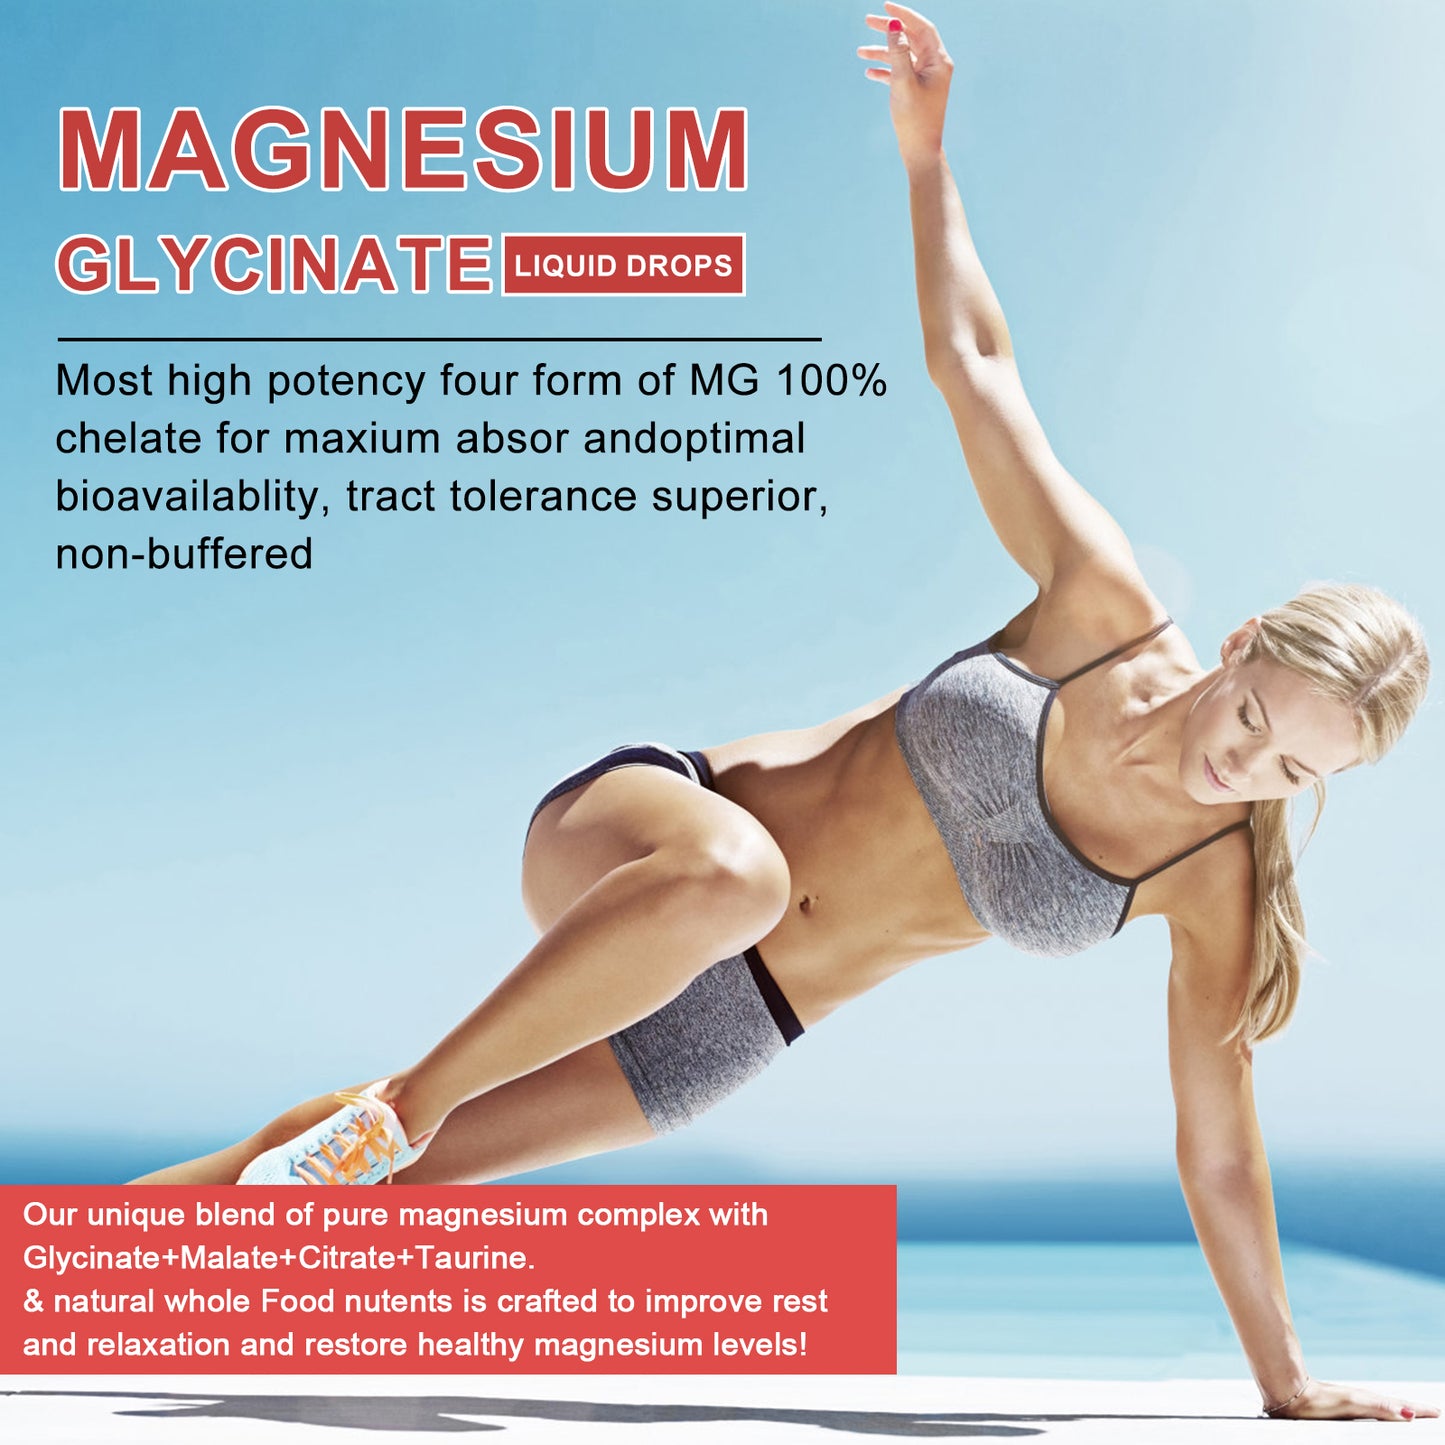 Magnesium Glycinate,Malate, Taurate & Citrate Complex Liquid Drop w/ Vitamin B,C,D,K,Potassium, Superfood Advanced Absorption- Bone Health, Nerves, Muscles & Energy Support Supplement-60 Days